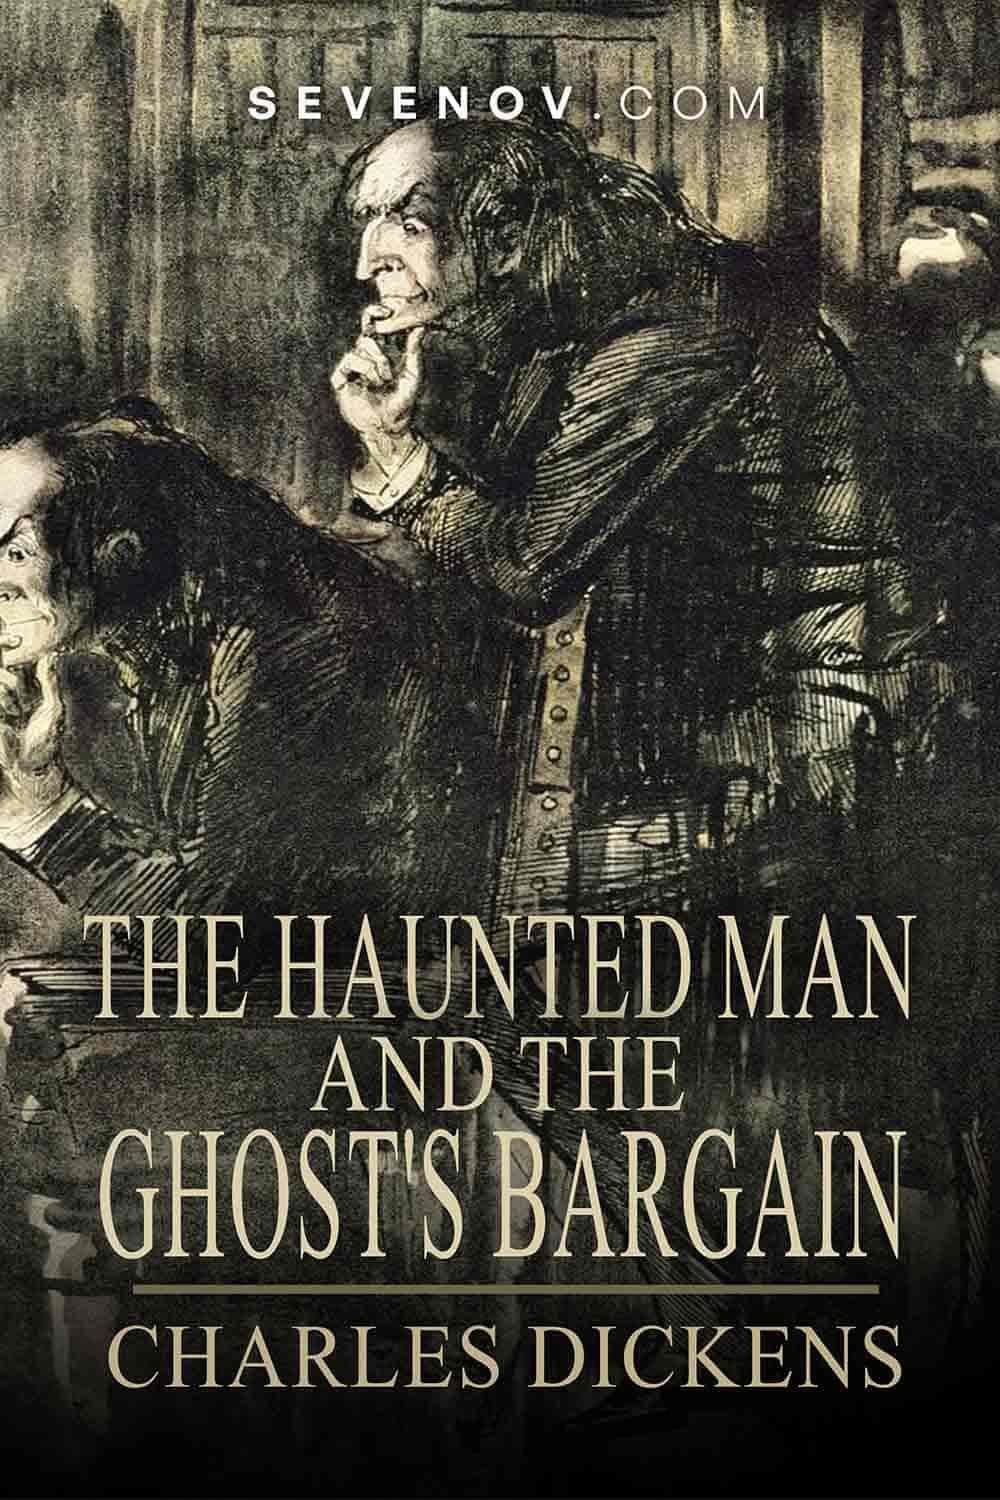 https://pagevio.com/wp-content/uploads/2023/01/the-haunted-man-and-the-ghost-s-bargain-20220608.jpg